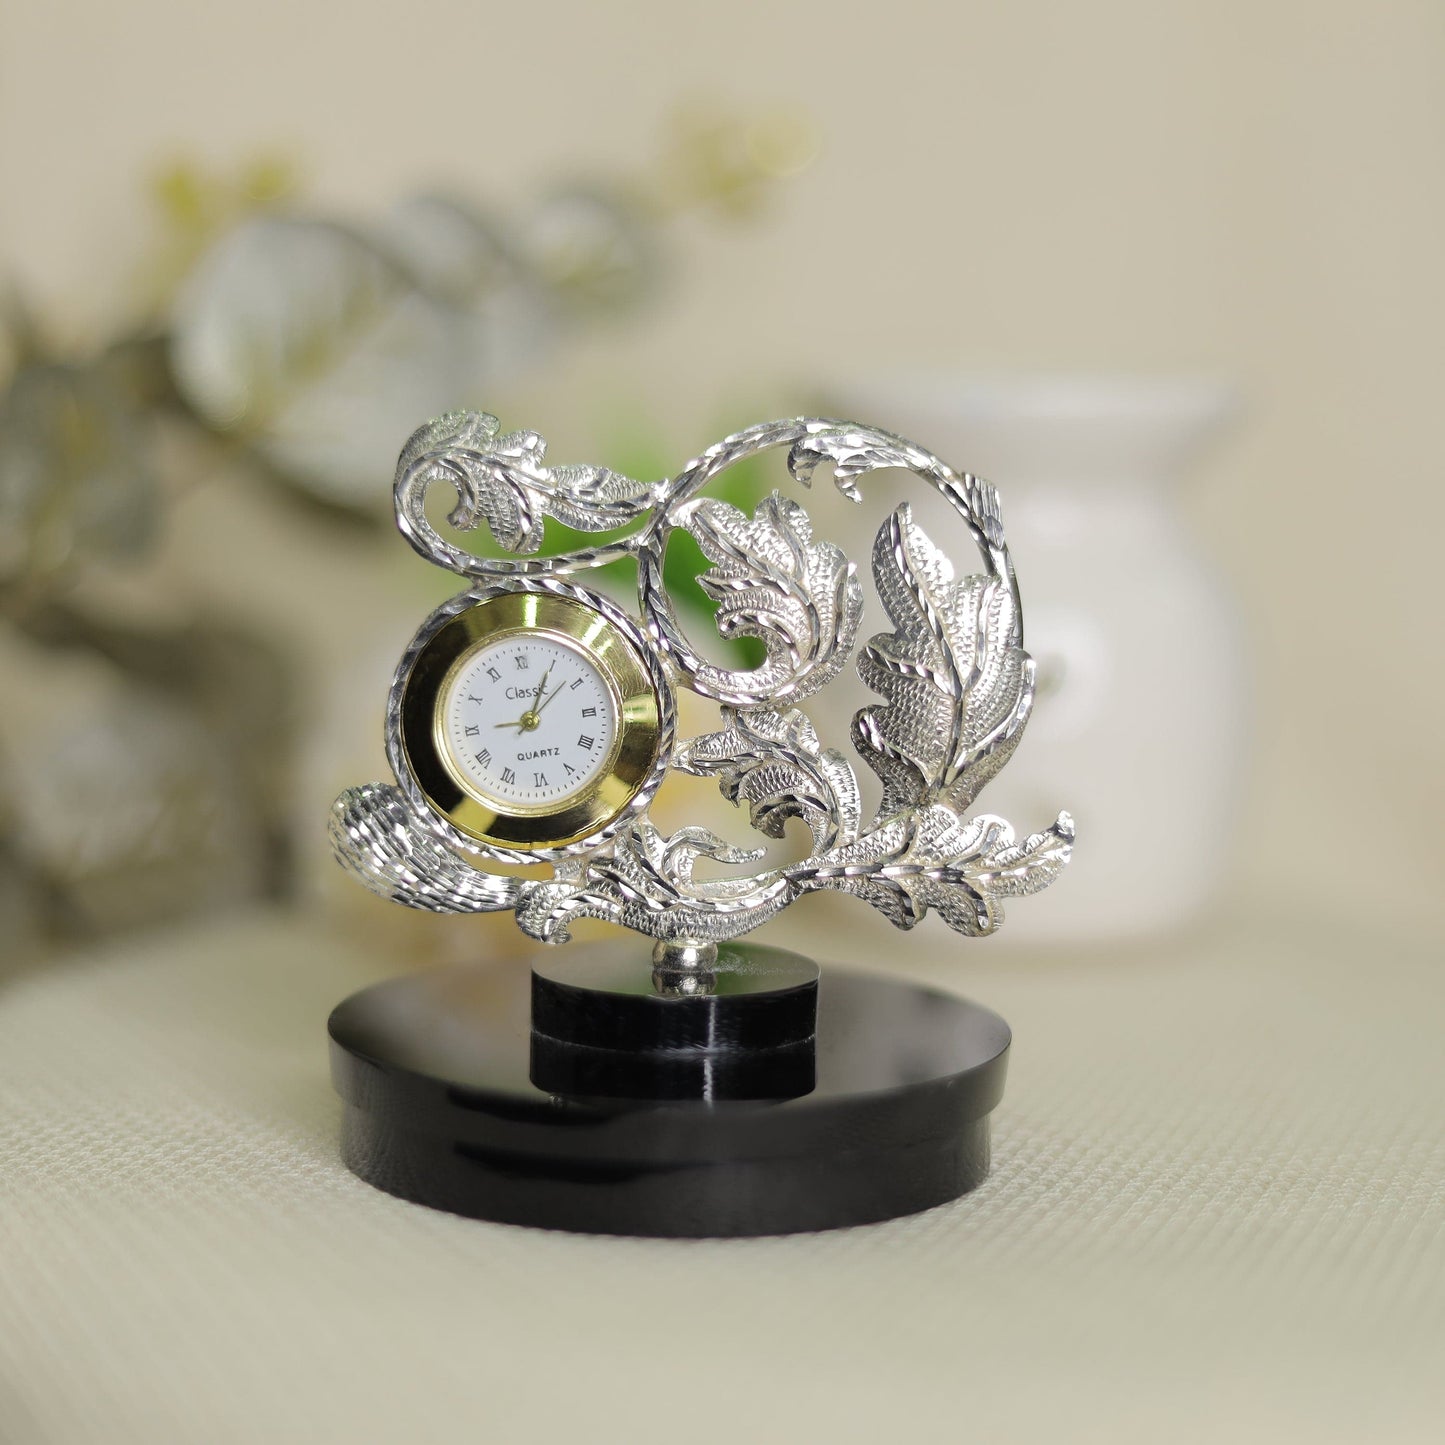 Designer Beautiful Silver Table Watch